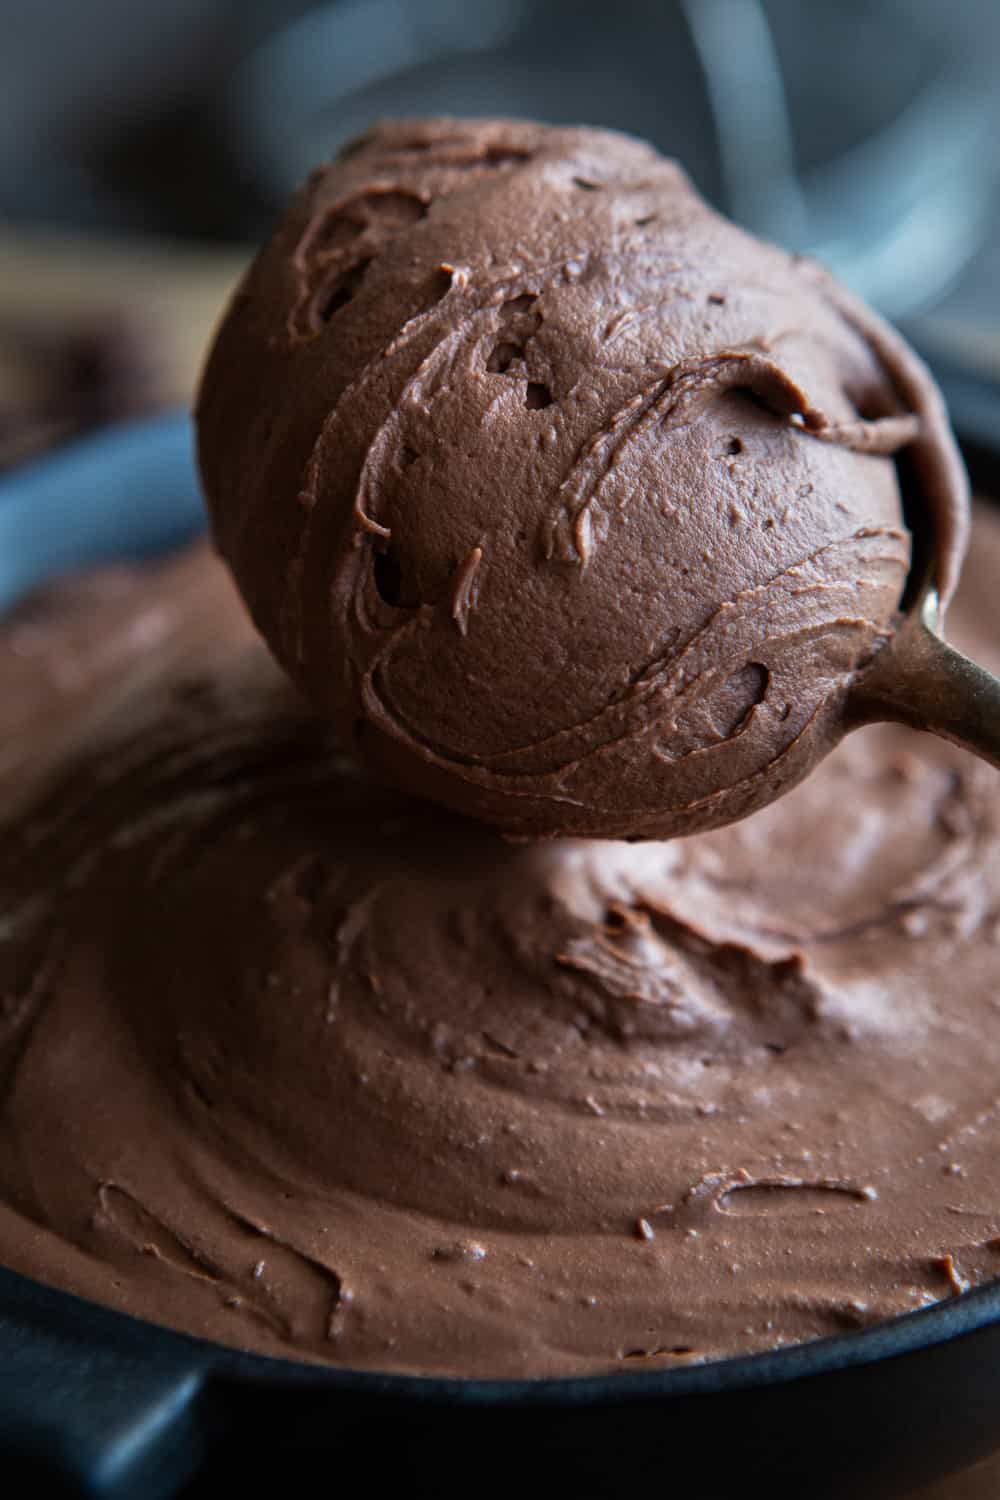 Vegan chocolate ganache being scooped up with spoon